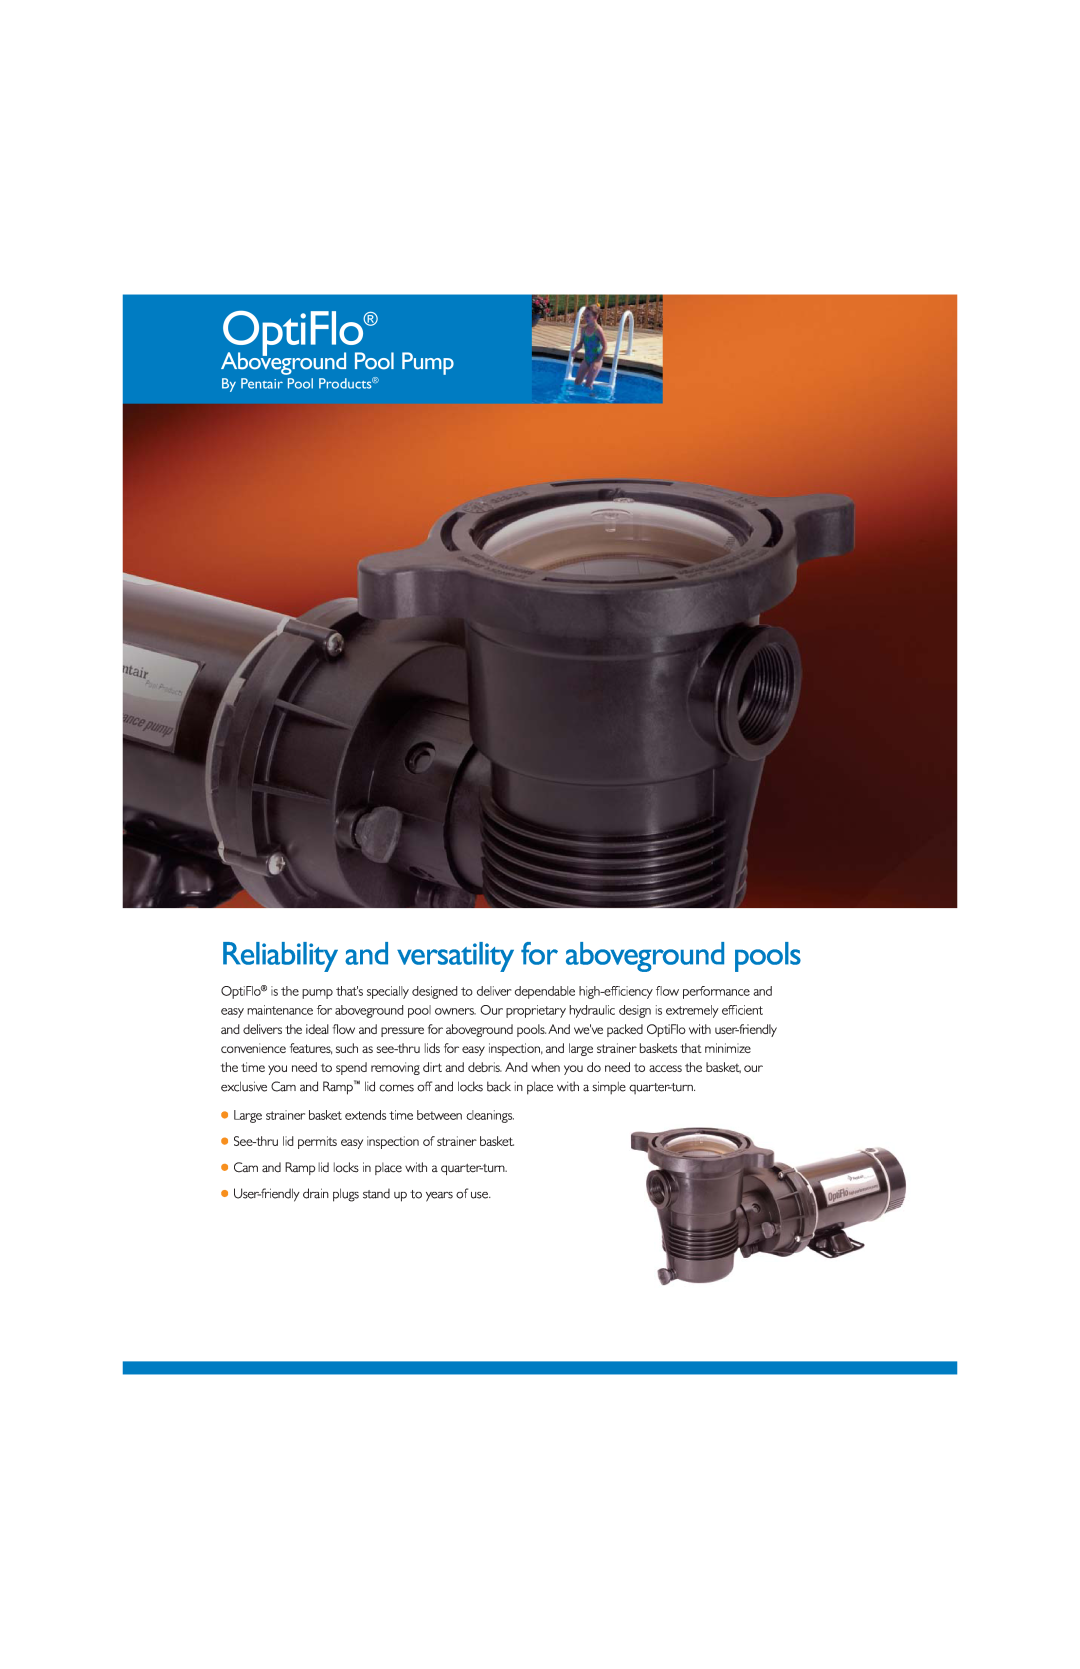 Pentair OptiFlo manual Reliability and versatility for aboveground pools, Aboveground Pool Pump, By Pentair Pool Products 